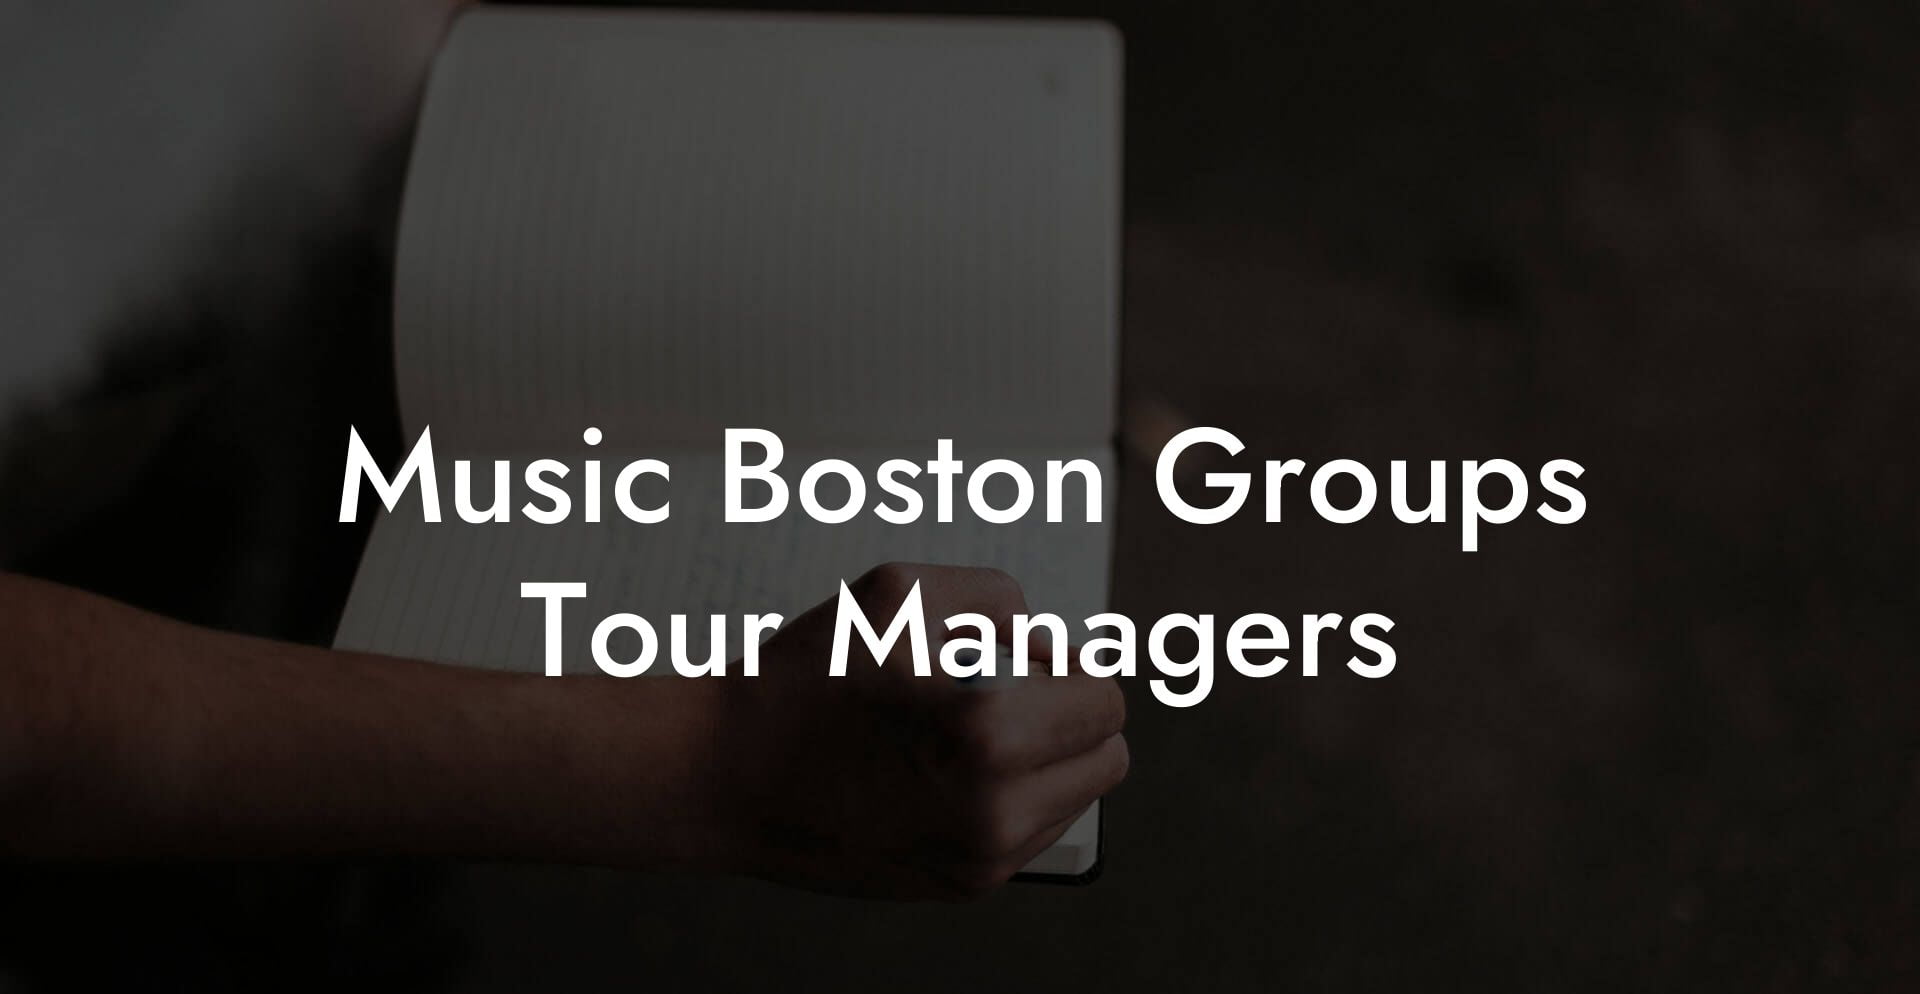 Music Boston Groups Tour Managers